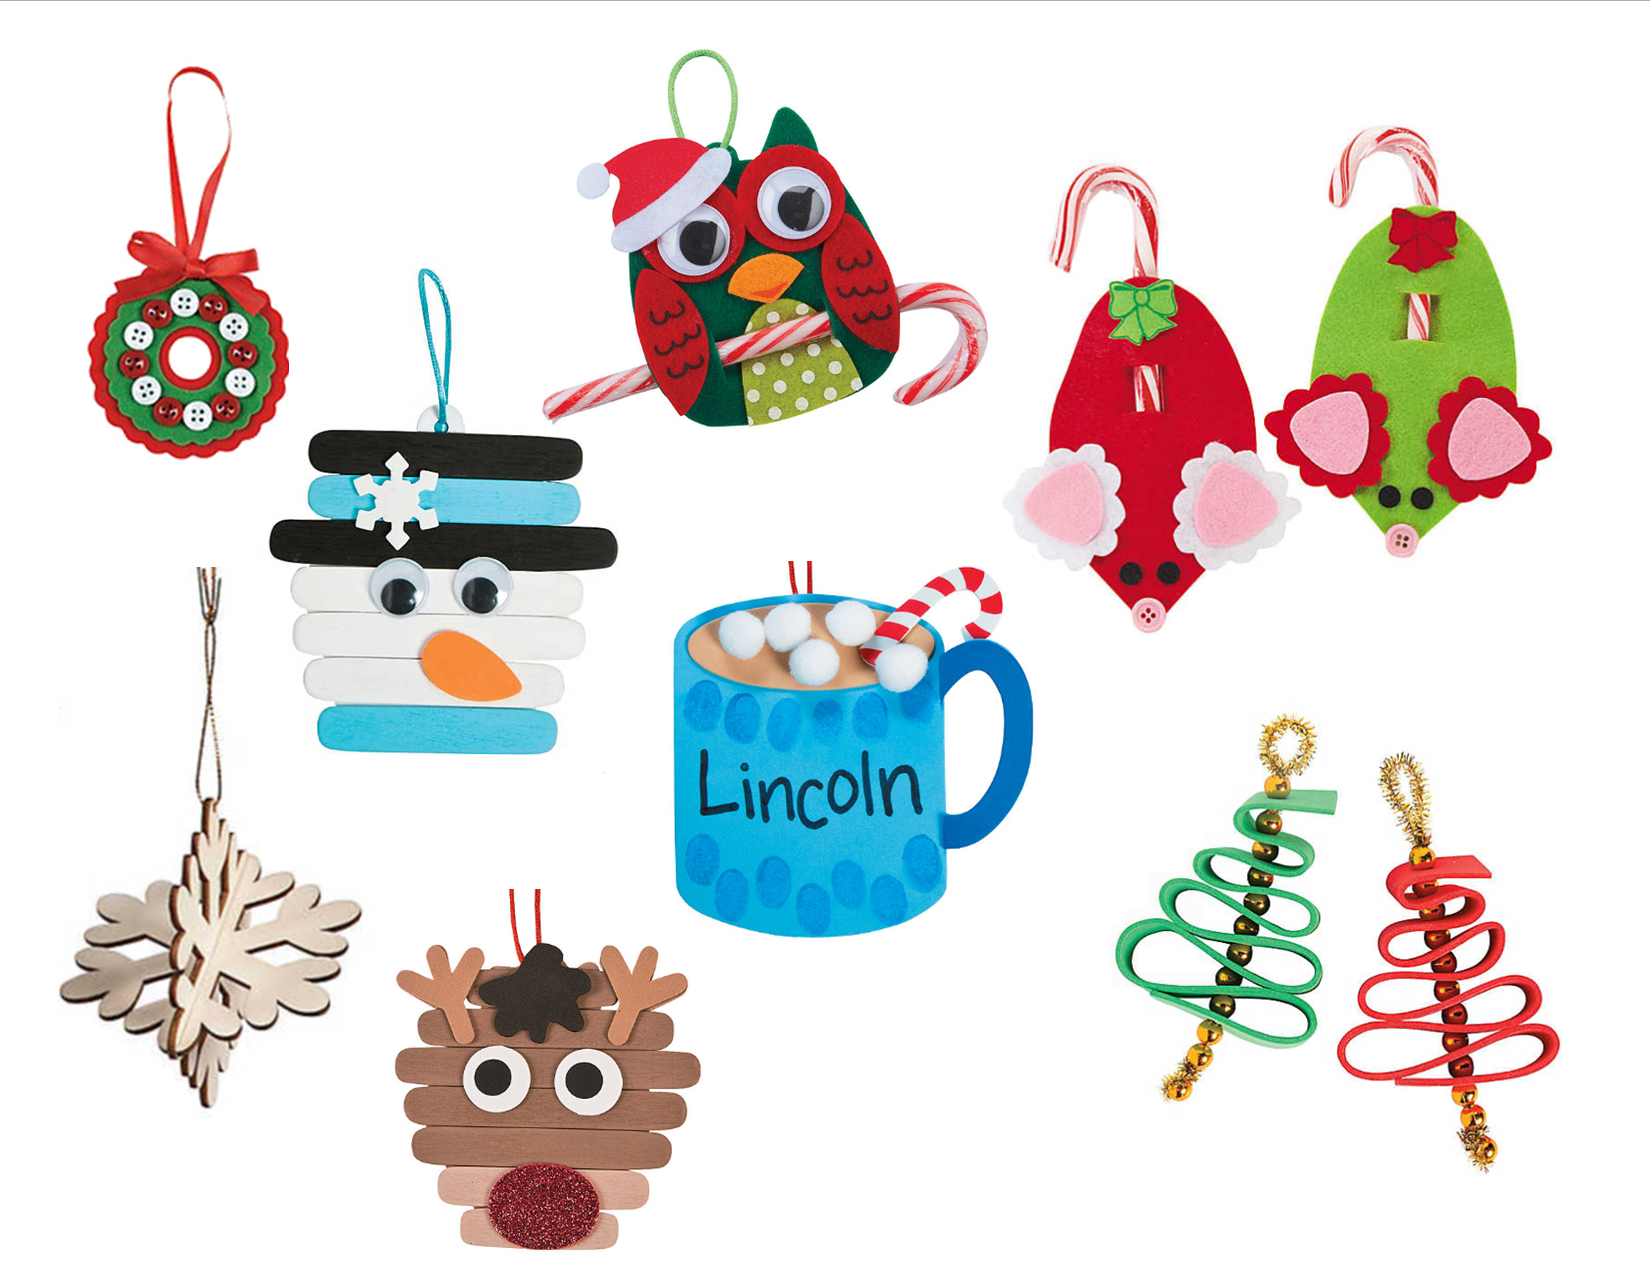 assorted Christmas ornaments